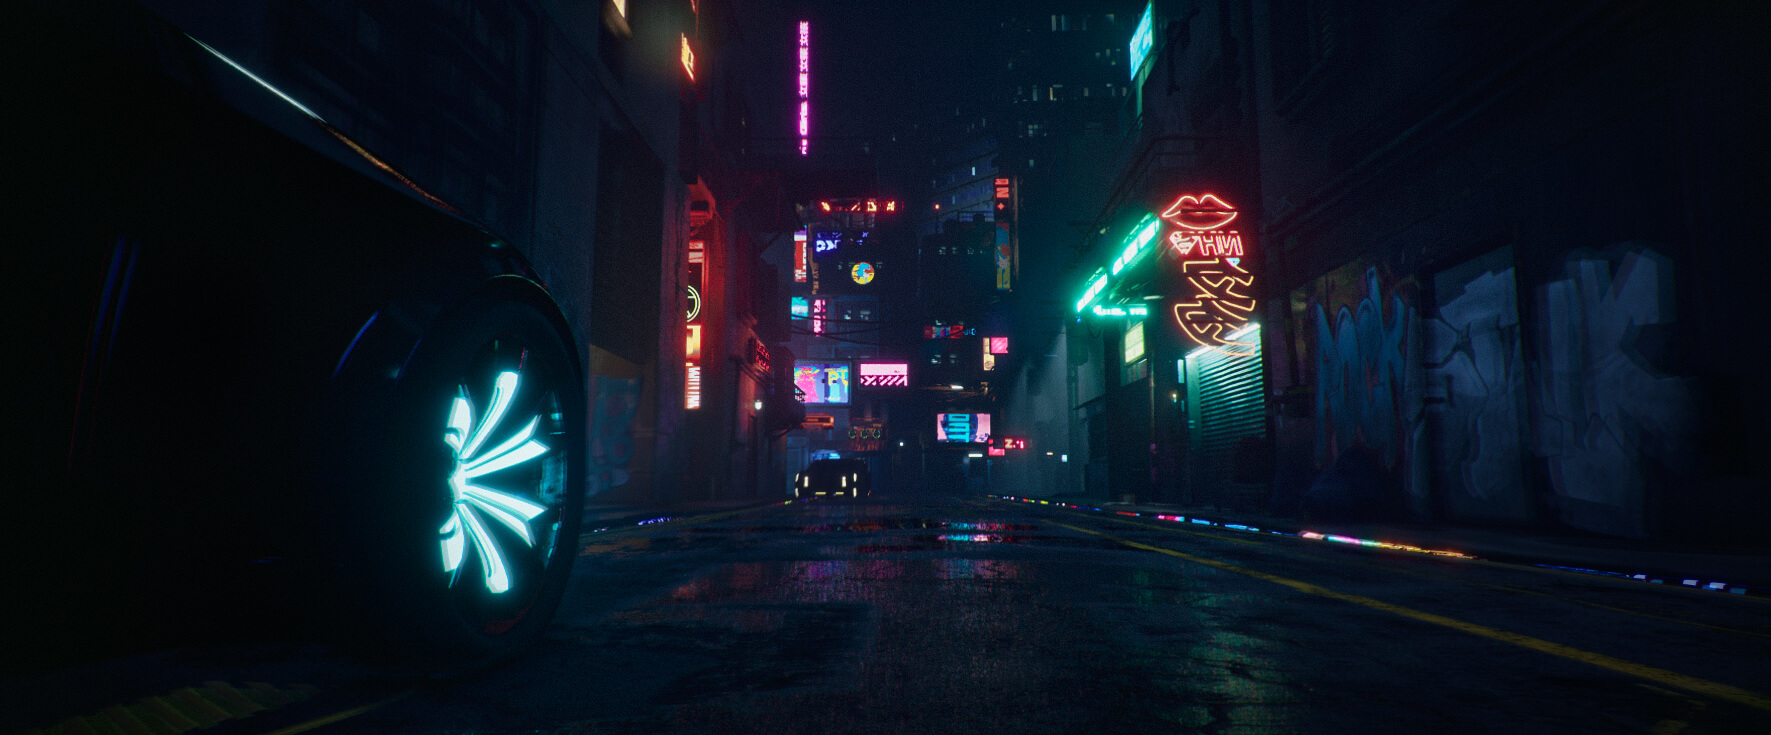 Cyber city - real-time environment